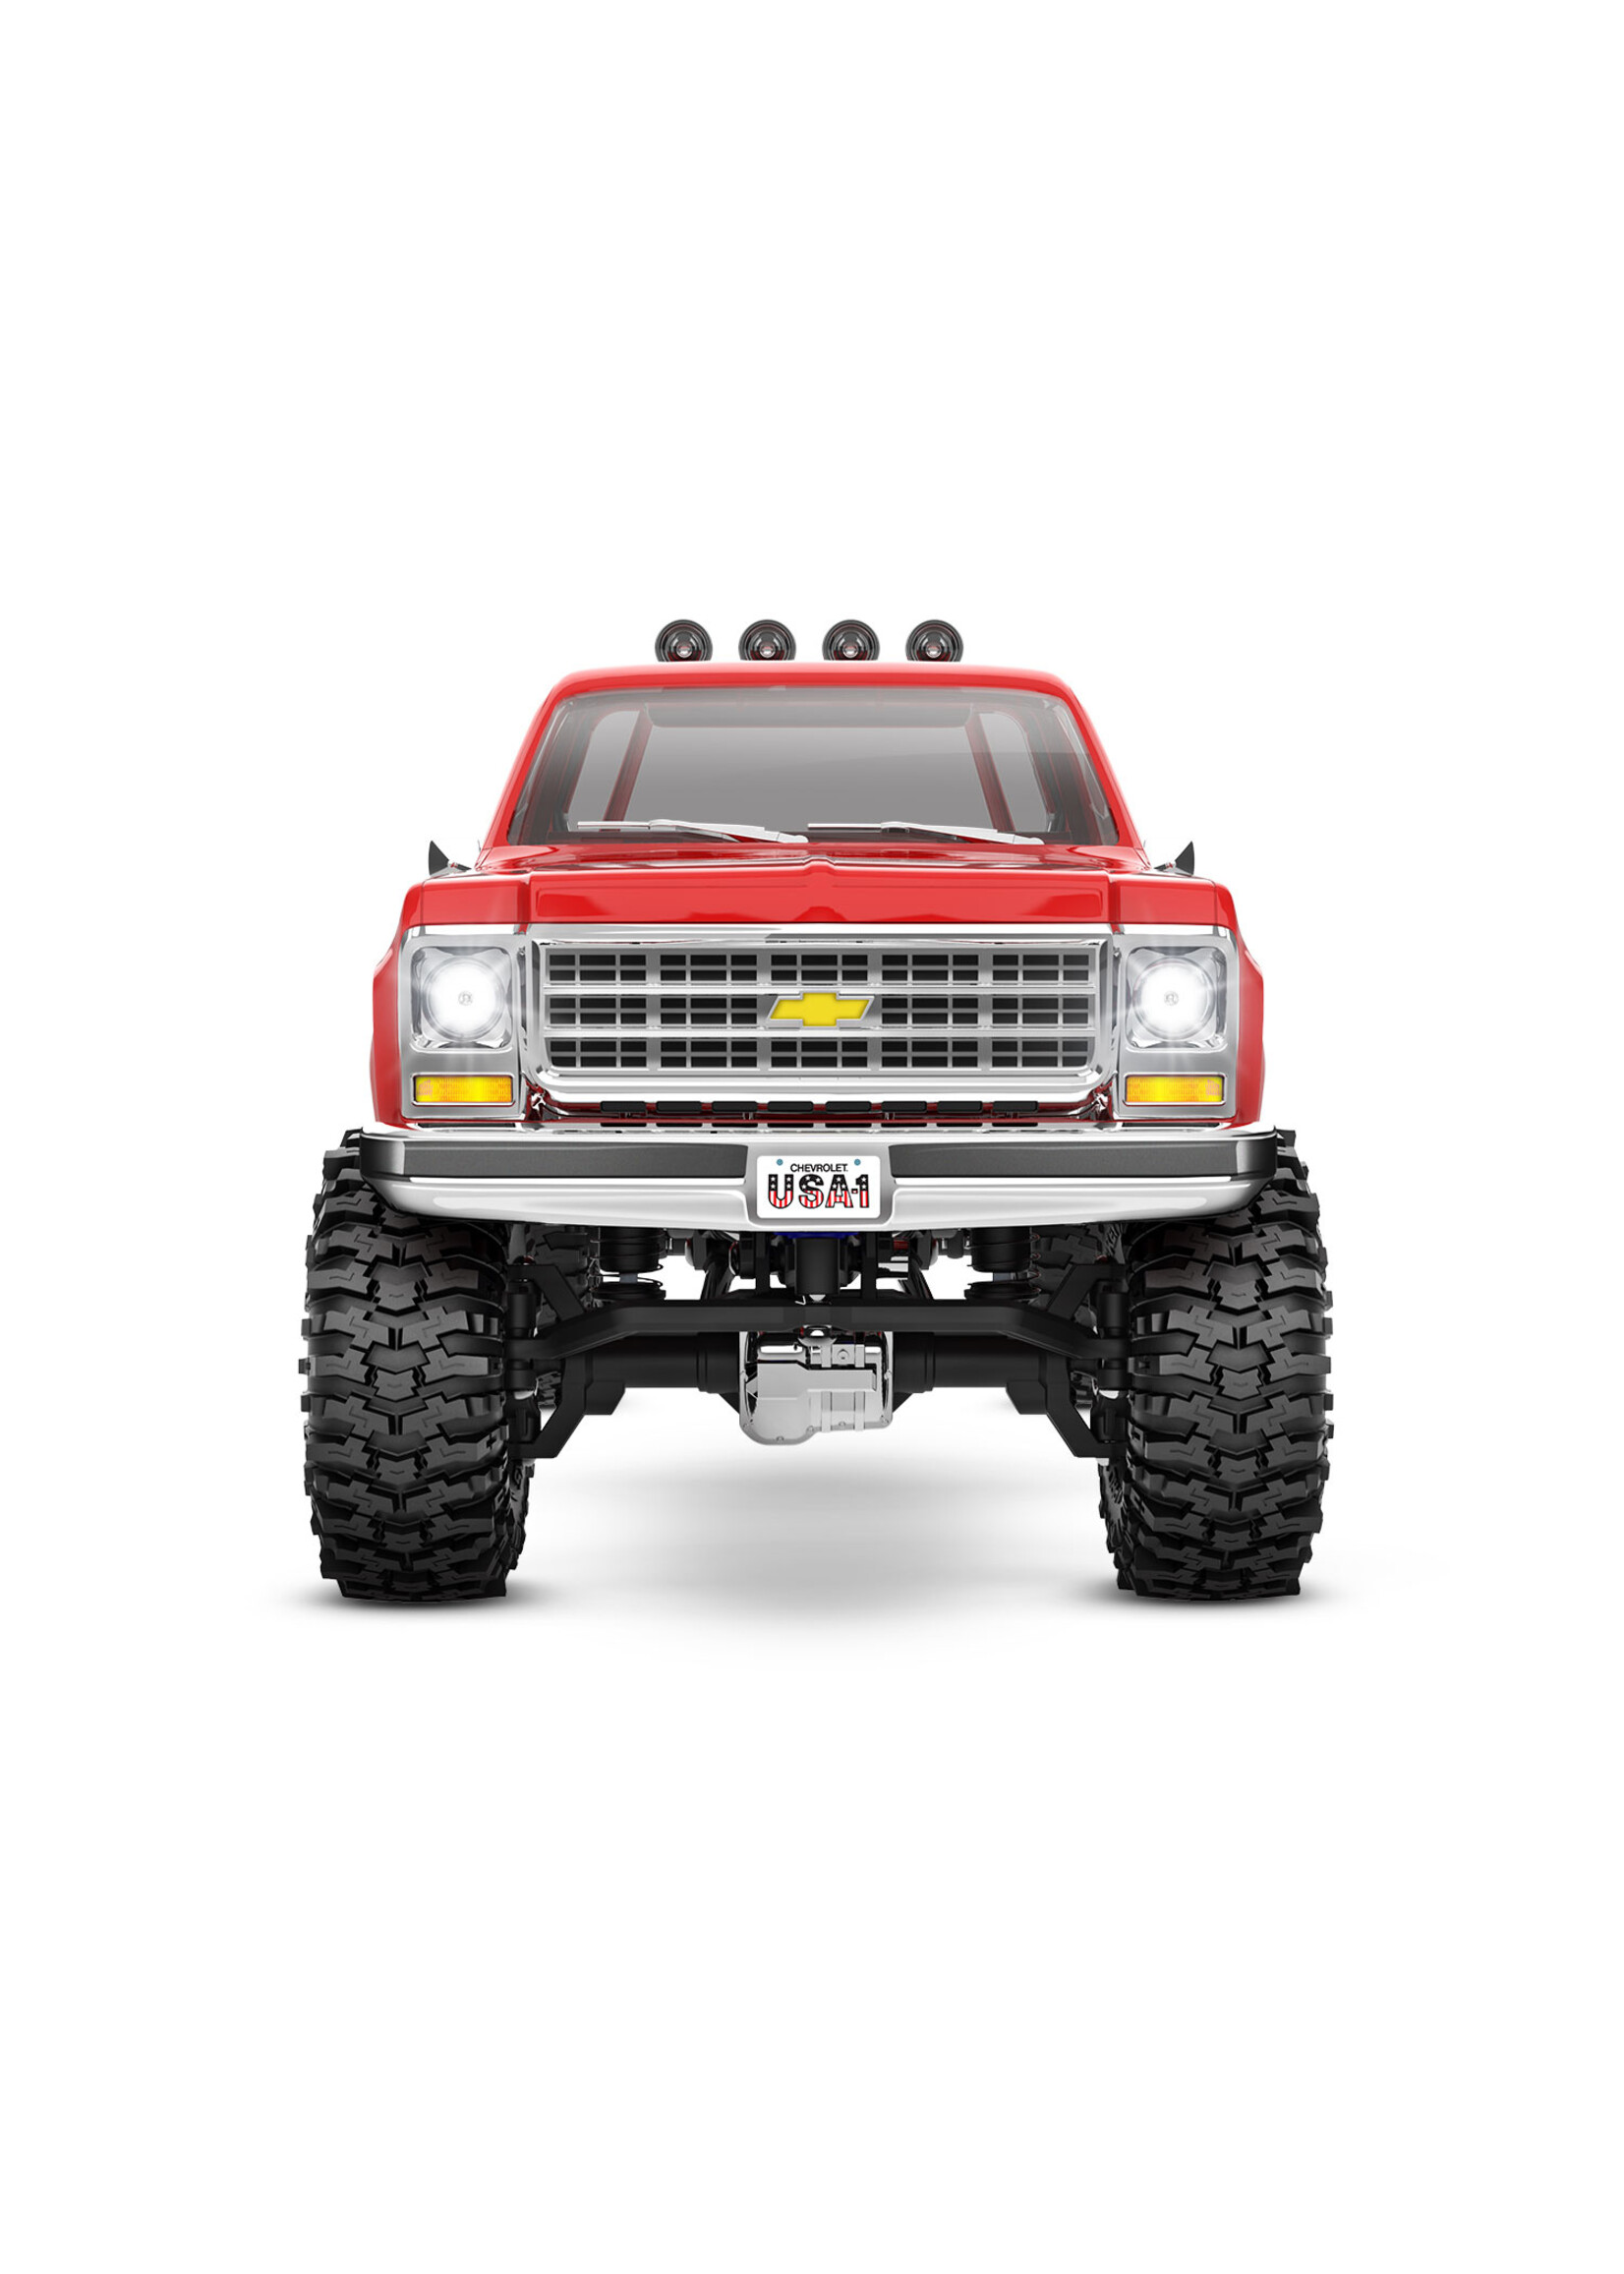 Traxxas 970641RED - 1/18 RTR Scale & Trail 1979 K-10 - Red